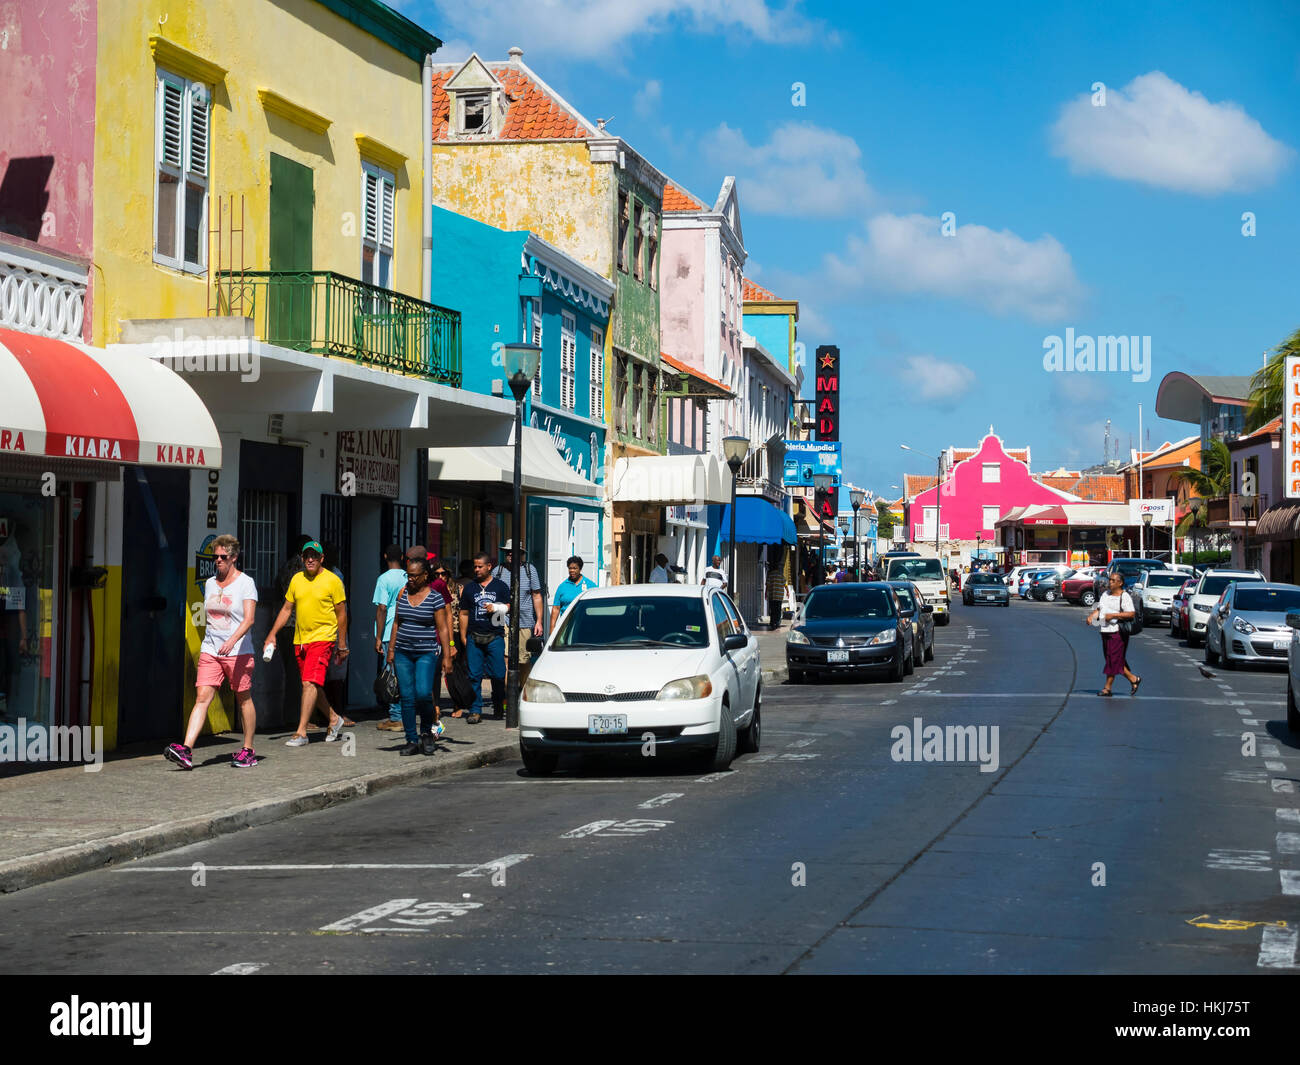 Colorful houses in Willemstad, Curacao, Lesser Antilles, Caribbean Stock Photo